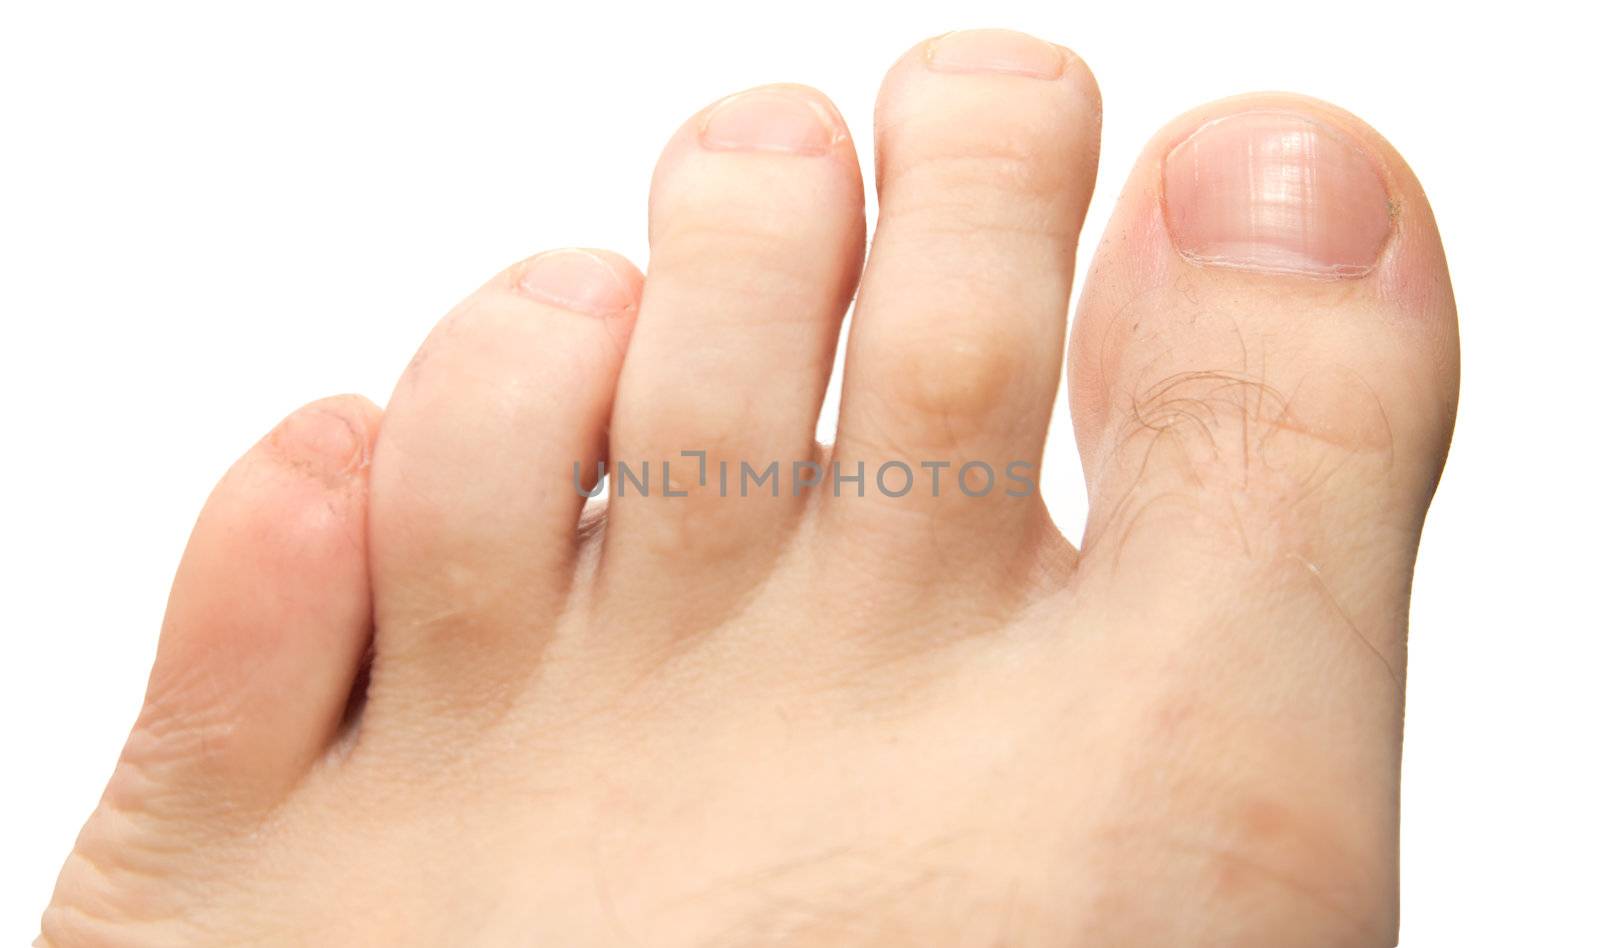 men's toes on a white background